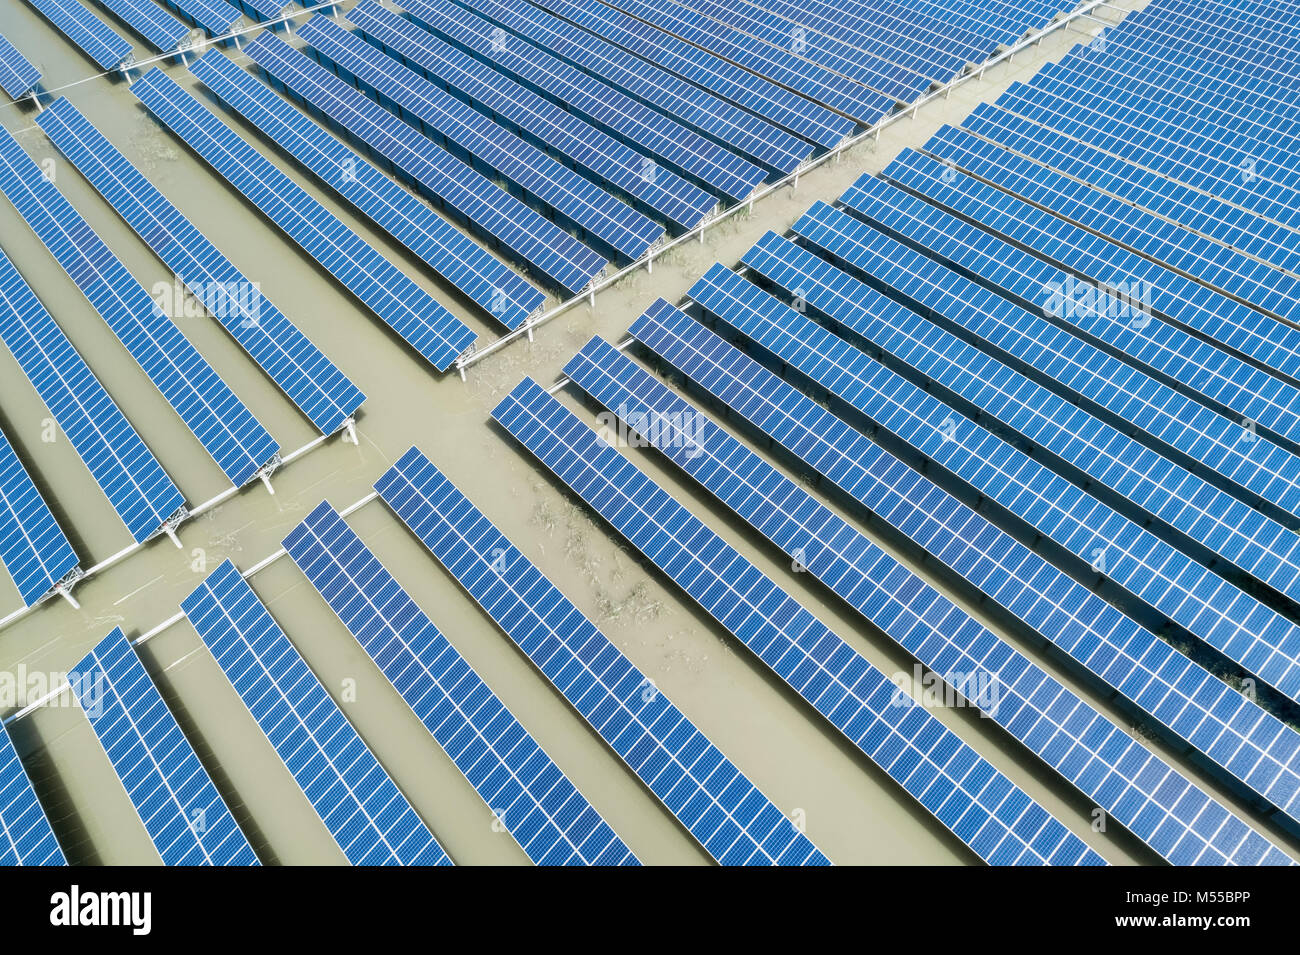 solar power plant from above Stock Photo